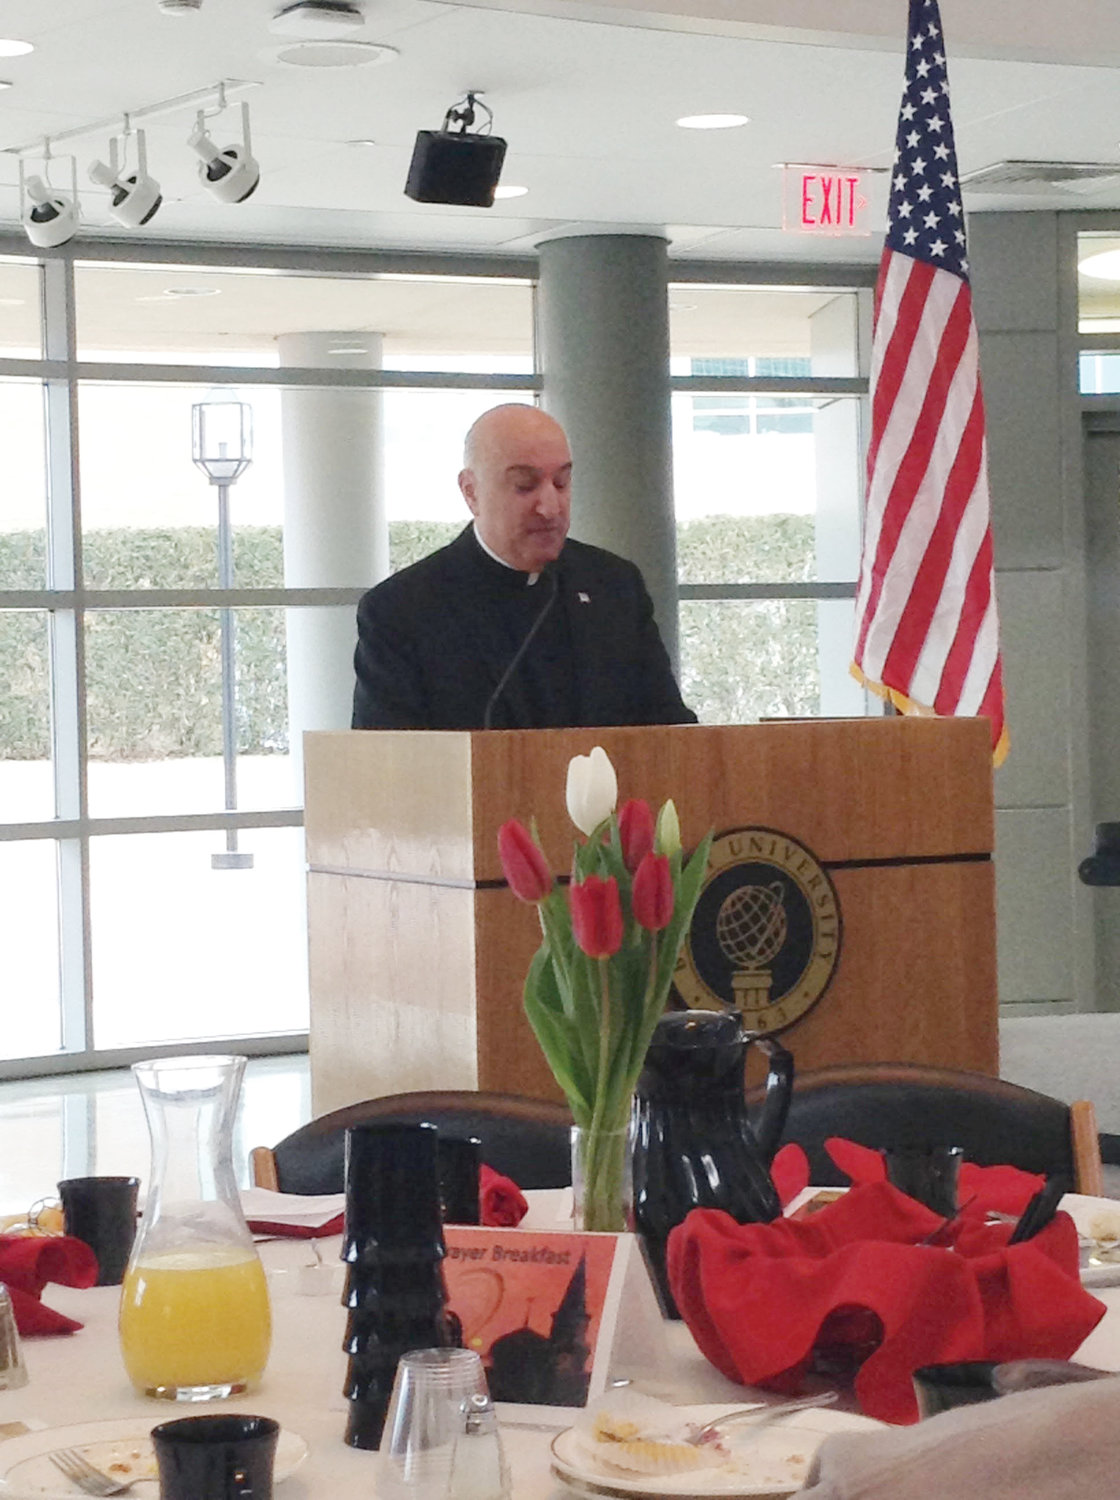 Father Robert Marciano, KHS, a member of Bryant’s Catholic Ministry, as well as pastor of St. Kevin Church and administrator of St. Benedict Church, both in Warwick, and president of Bishop Hendricken High School, delivers the keynote address during the event.